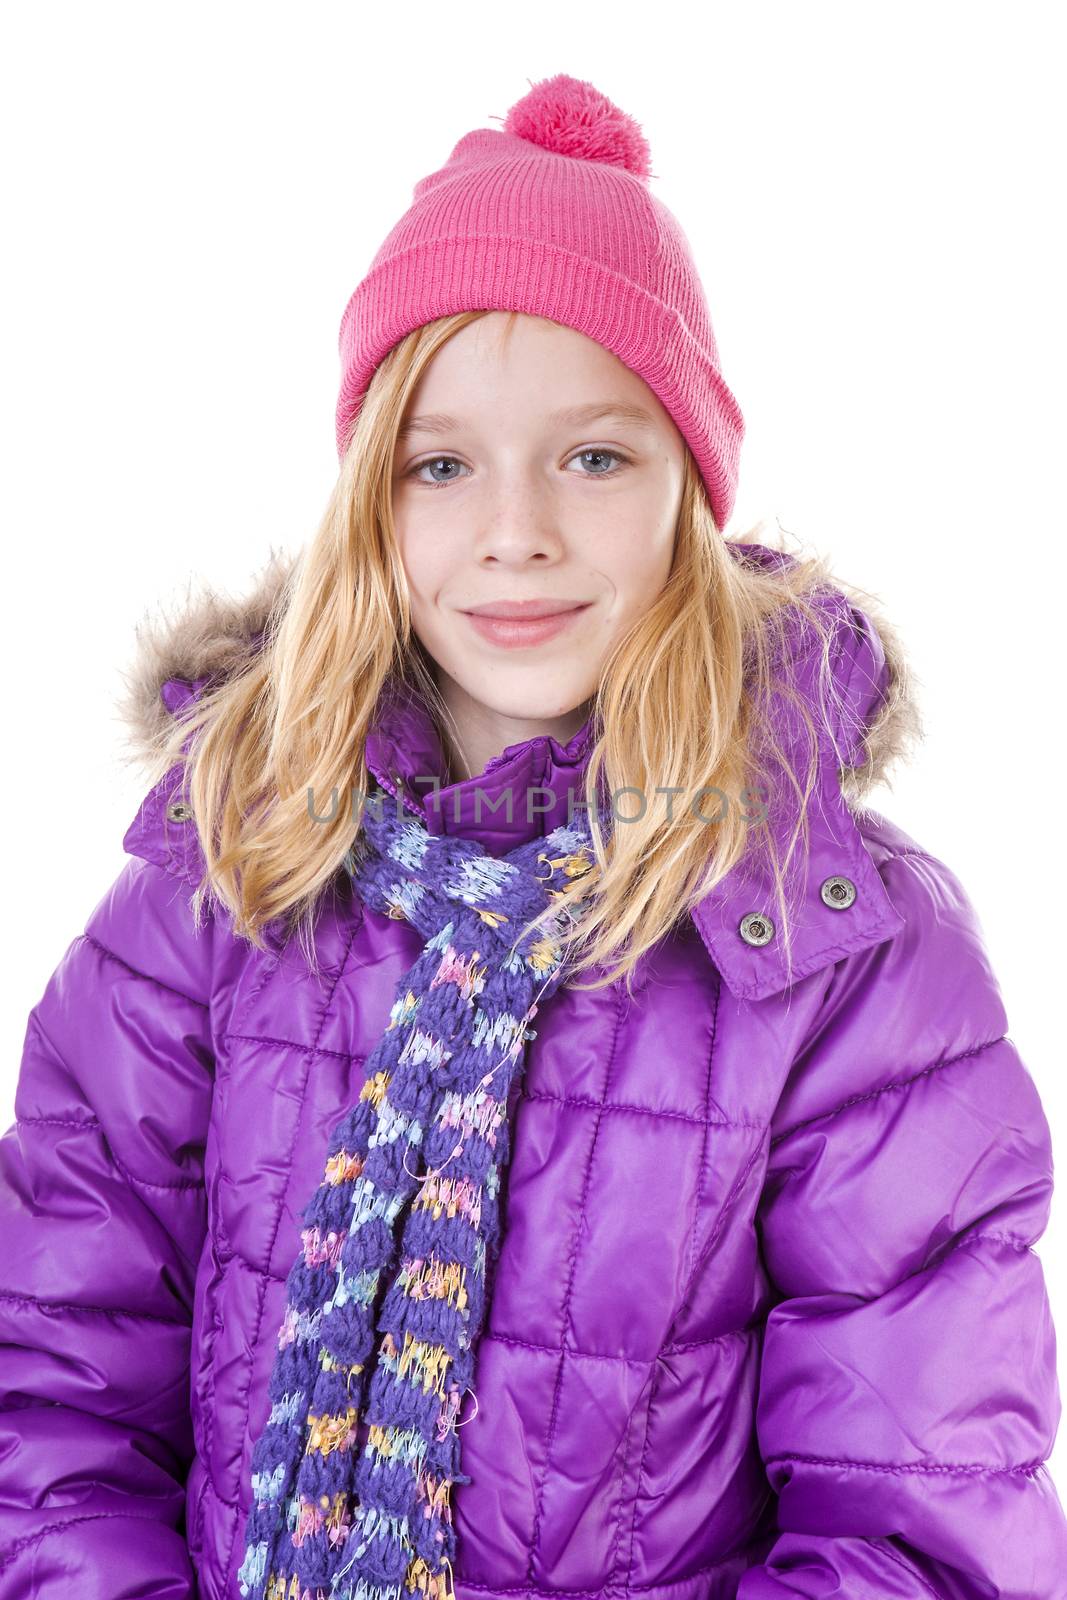 Teenage girl is posing in winter outfit over white backgroung